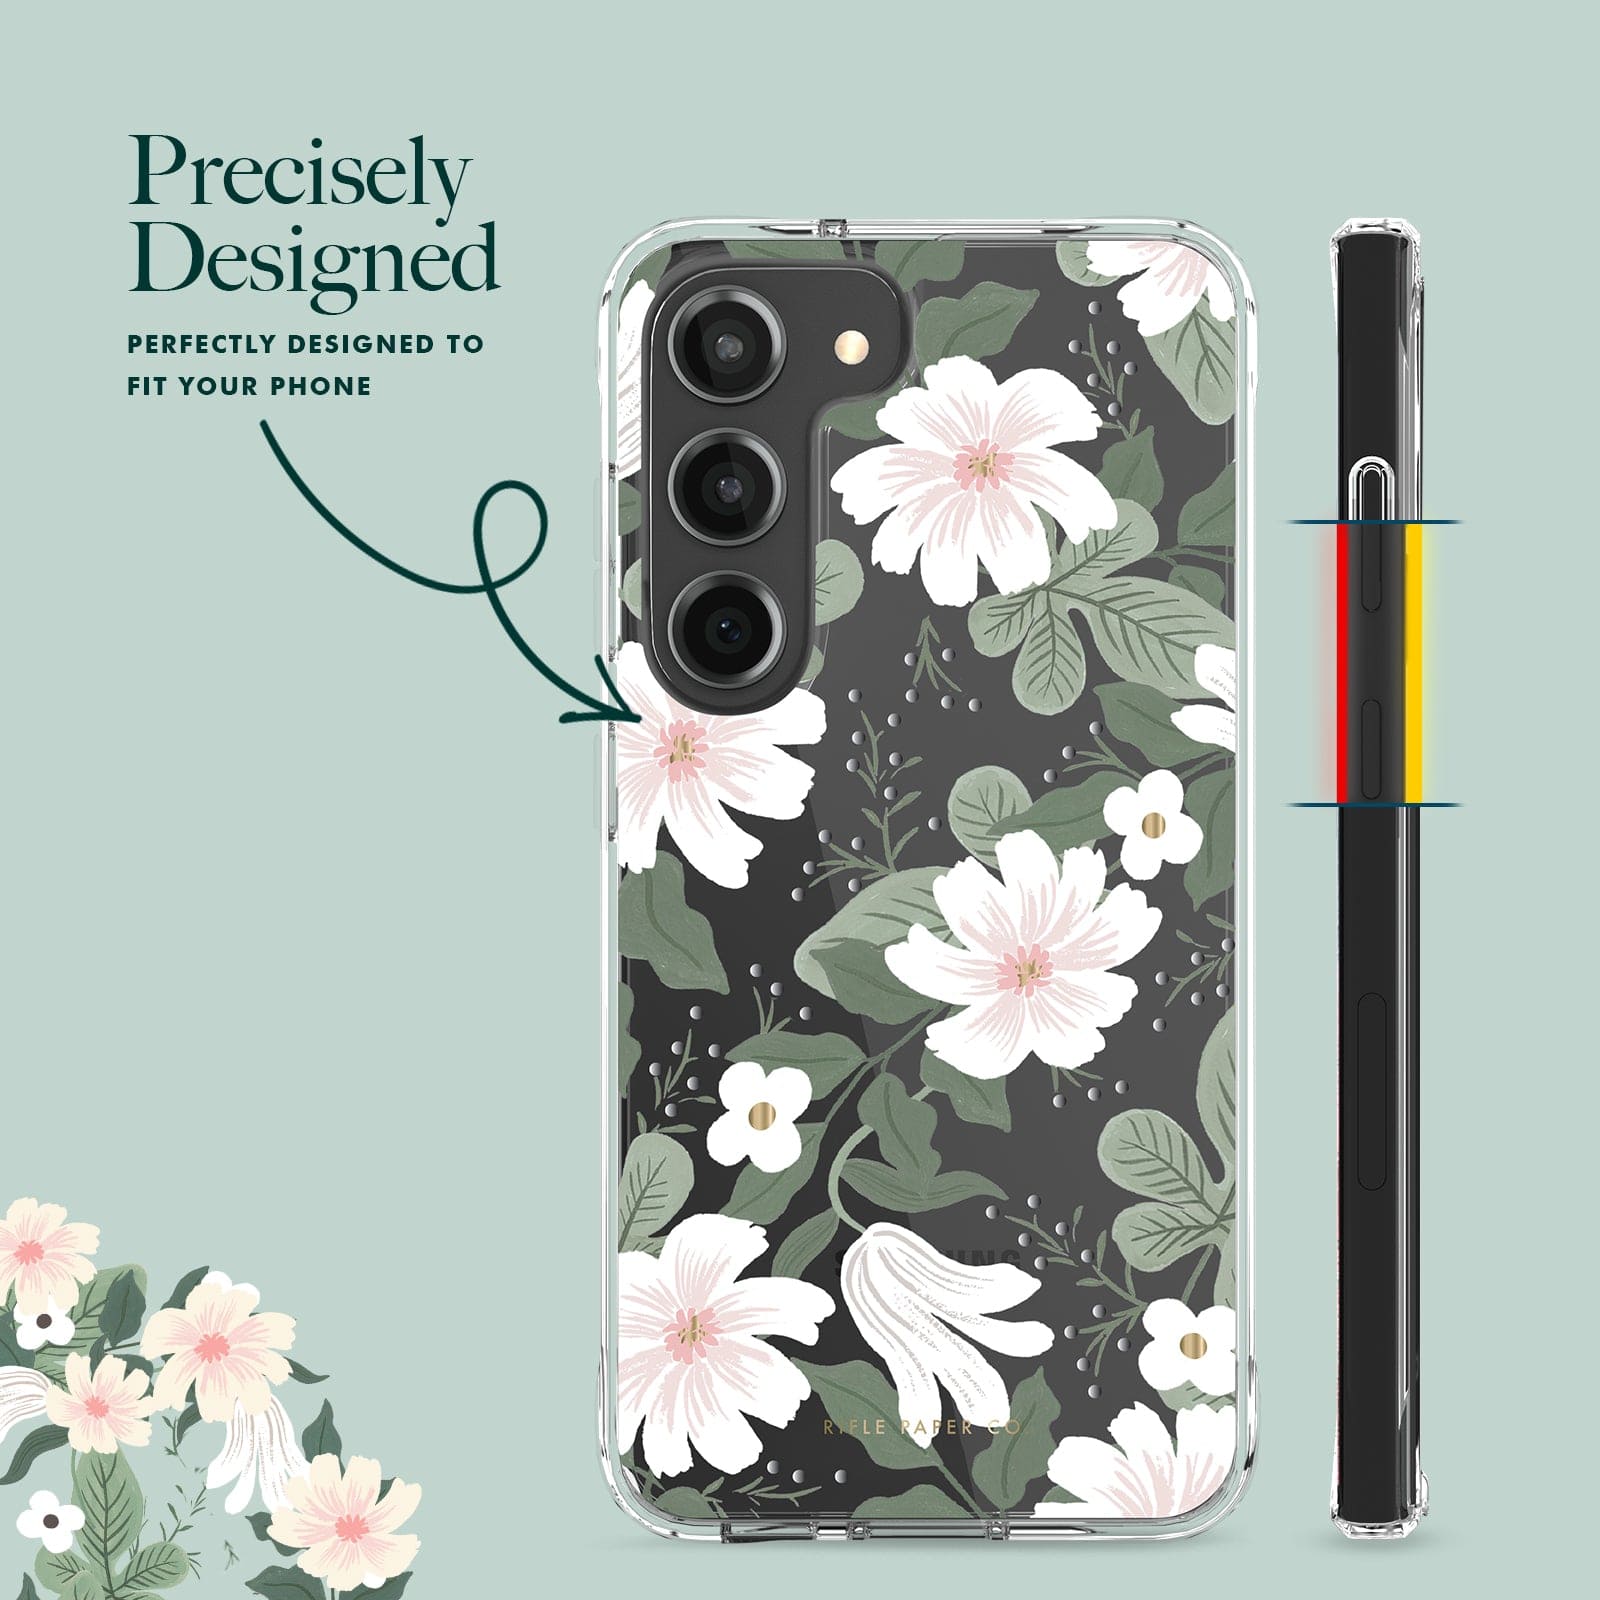 PRECISELY DESIGNED. PERFECTLY DESIGNED TO FIT YOUR PHONE.